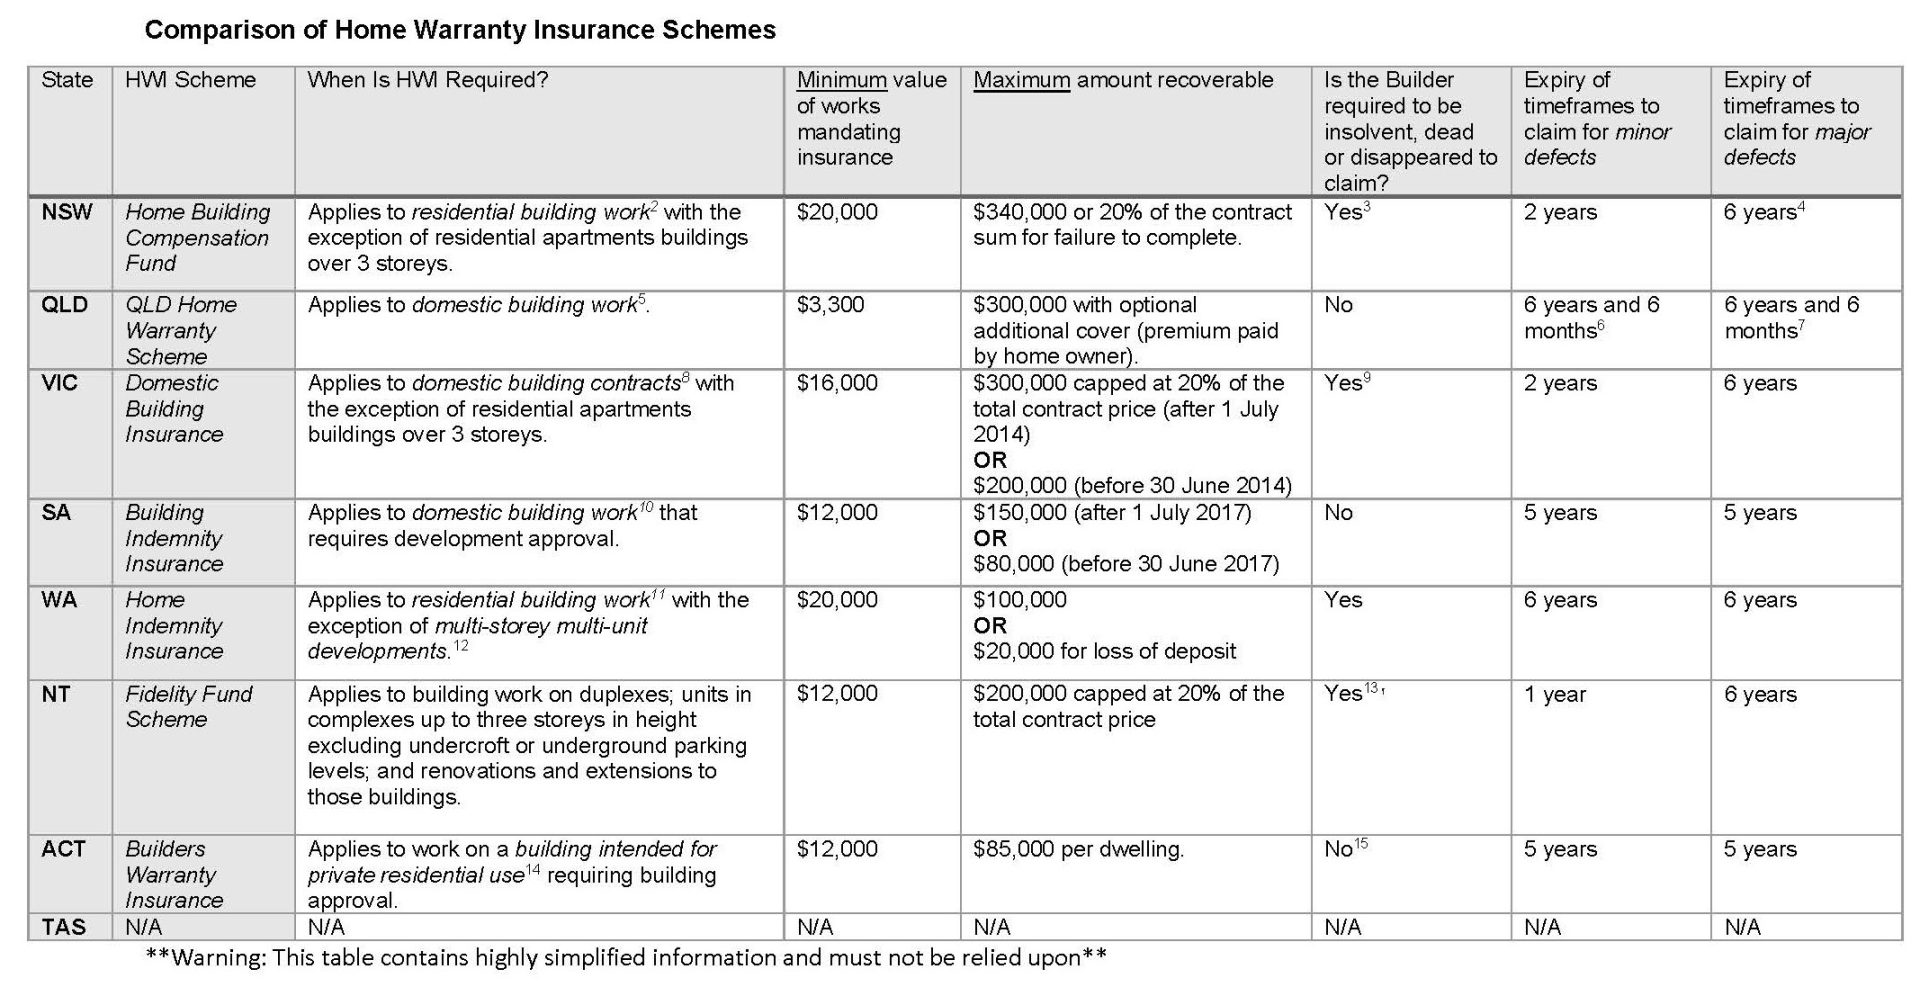 Comparison Of Home Warranty Insurance Schemes 16.12 Redacted 